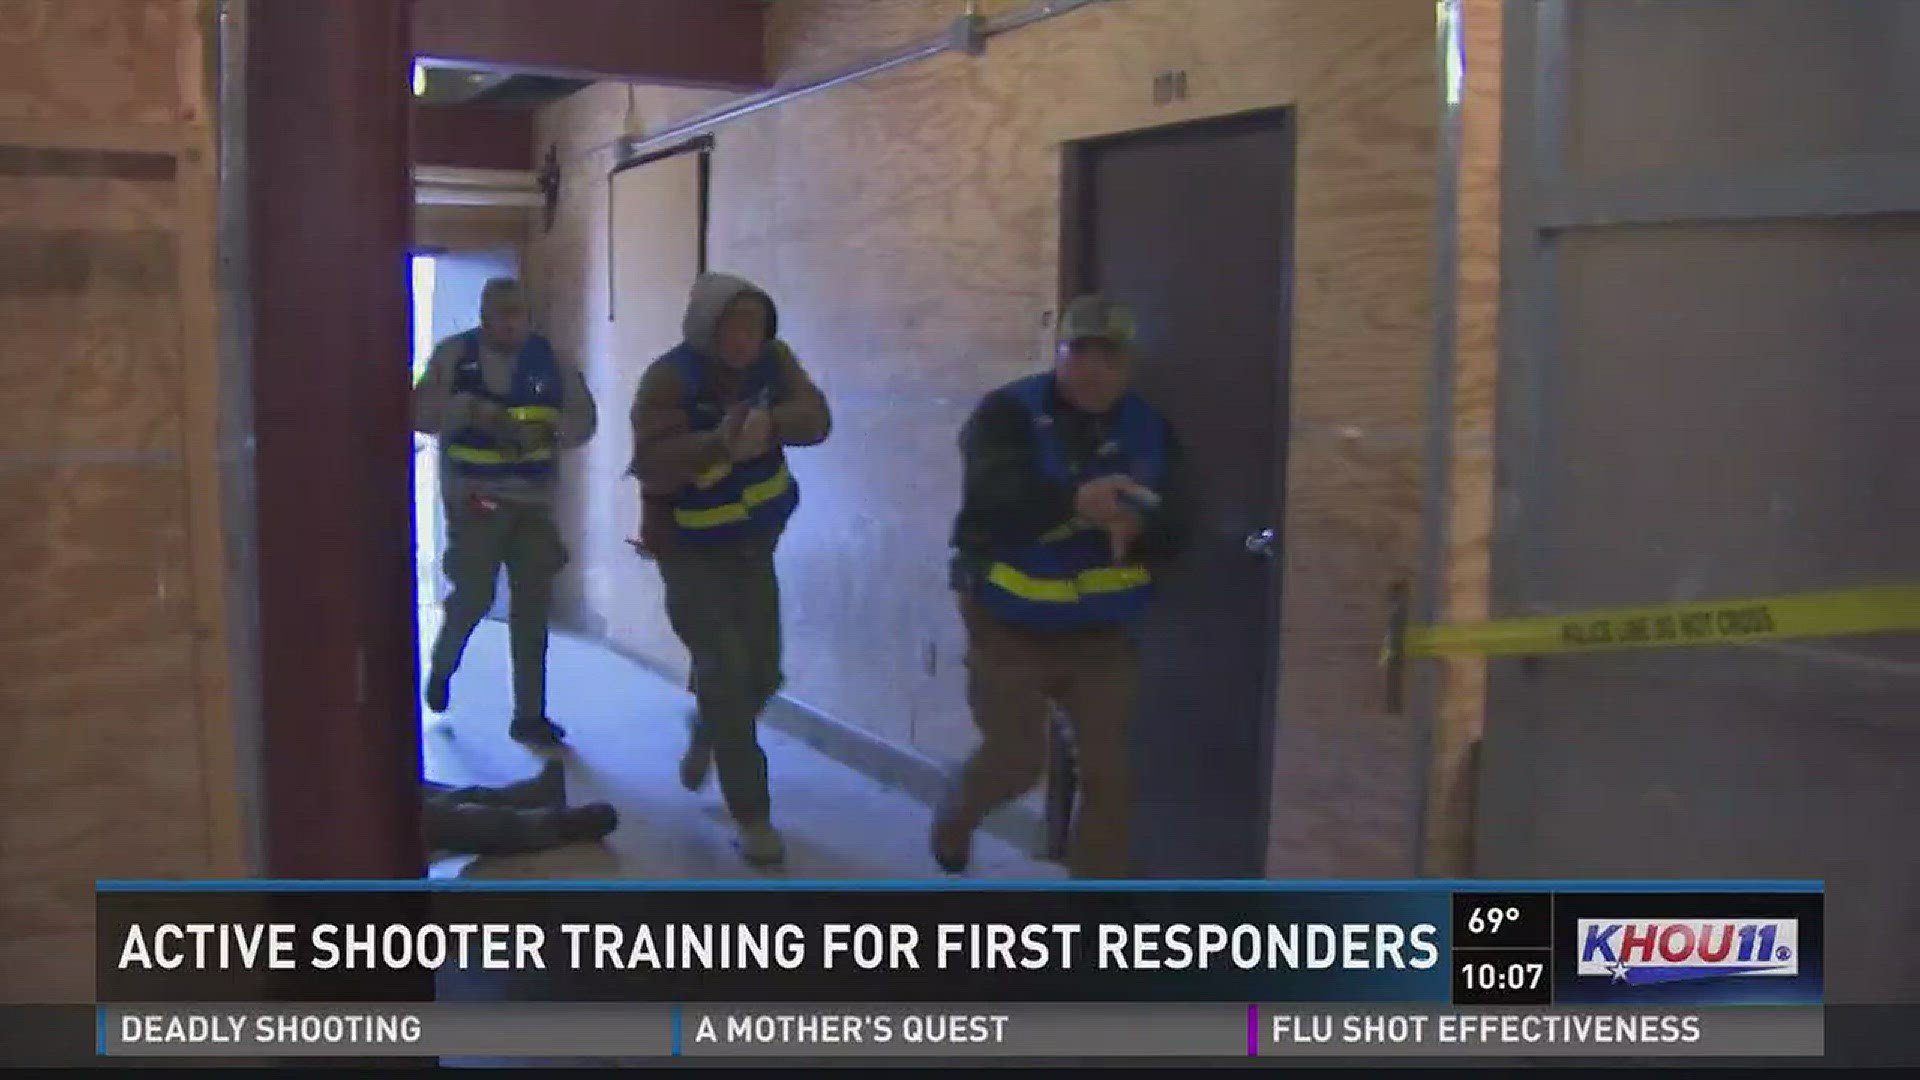 First responders from across the country come to Texas for active shooter training. At Texas State University, the Advanced Law Enforcement Rapid Response Training Center offers courses for any current active duty law enforcement, often at no cost.